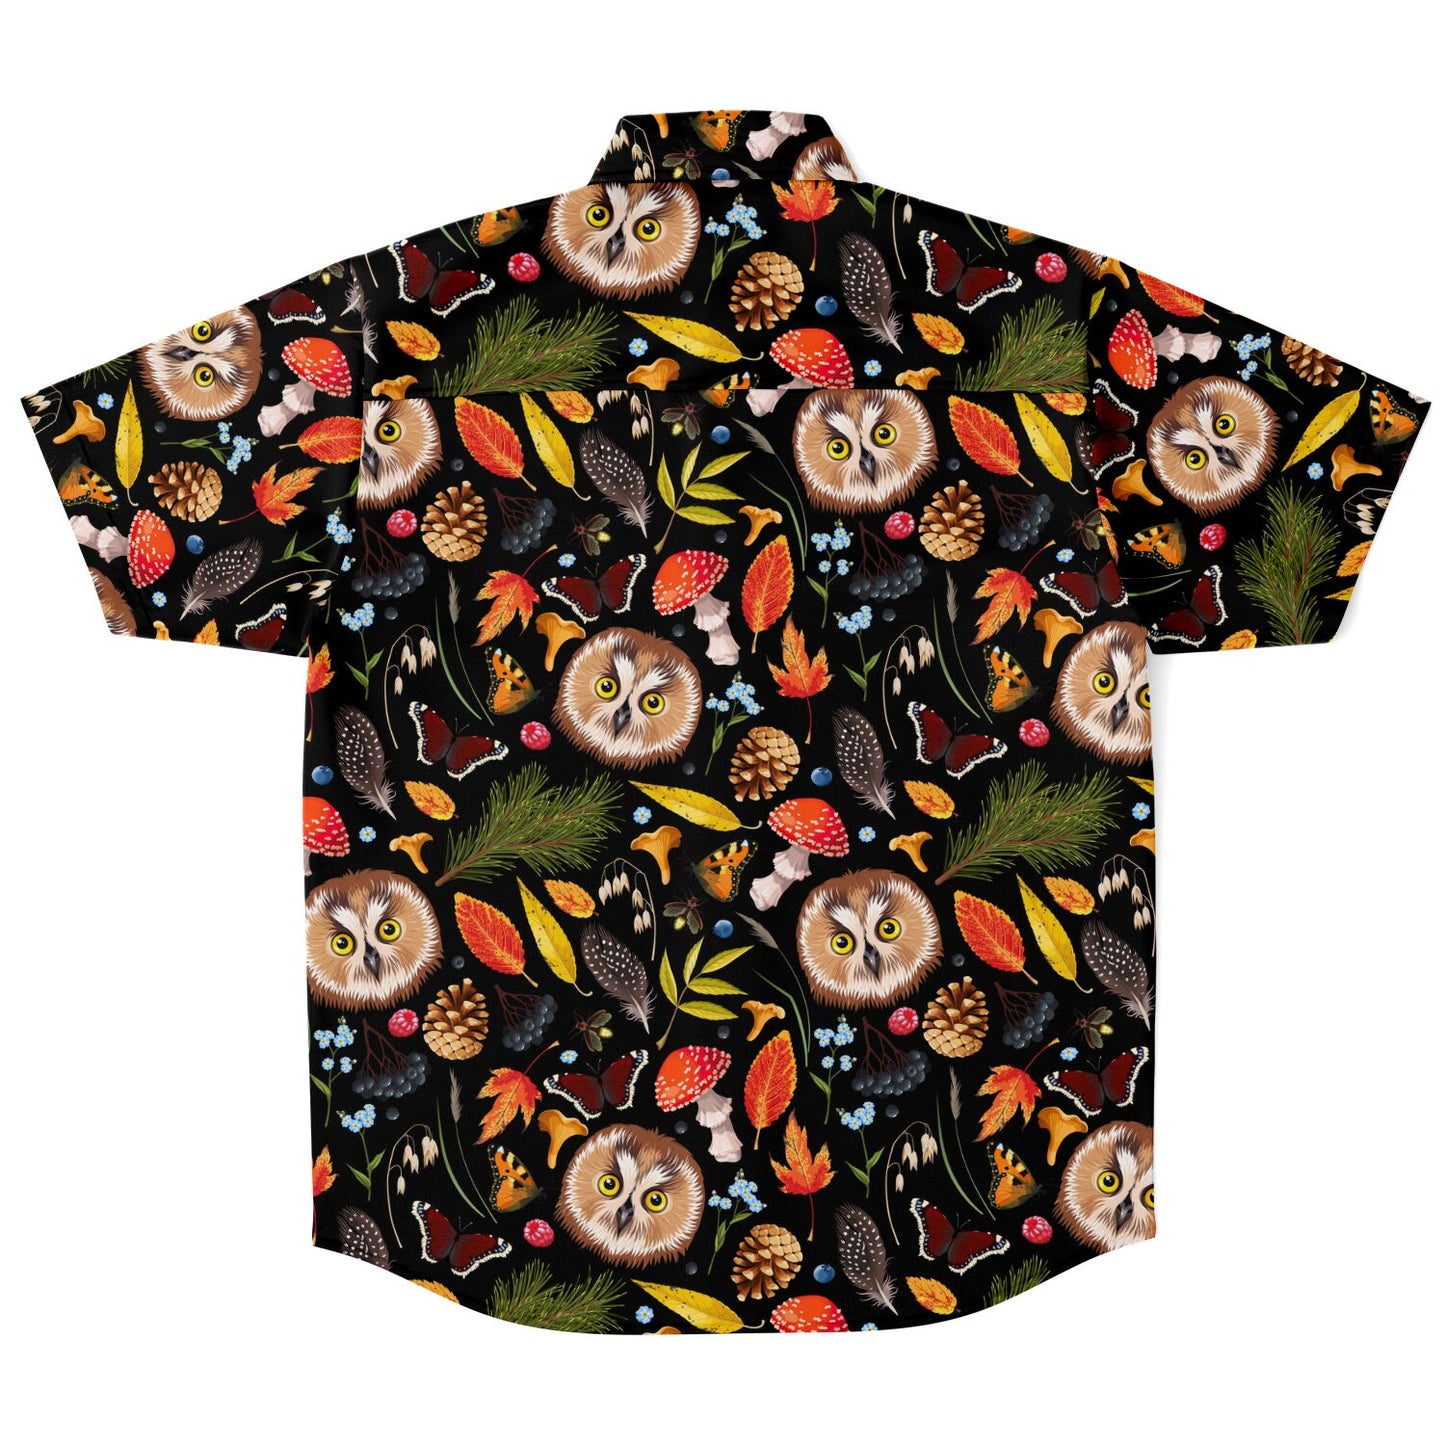 Cottage-core Forest short sleeve button-up shirt